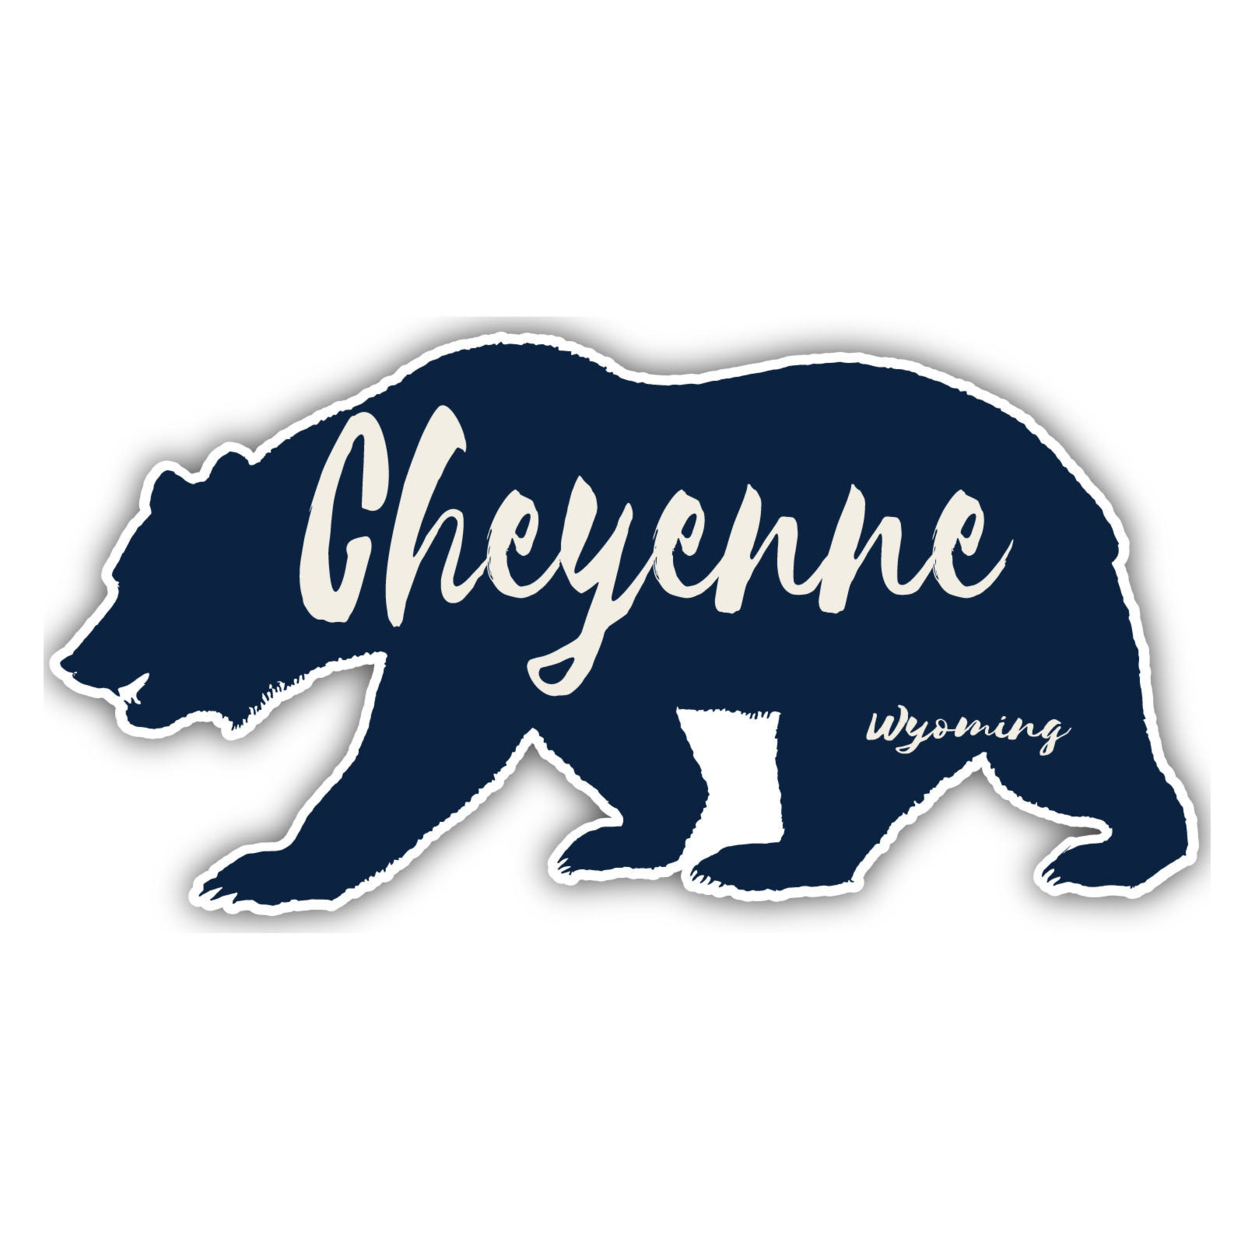 Cheyenne Wyoming Souvenir Decorative Stickers (Choose Theme And Size) - 4-Pack, 12-Inch, Bear